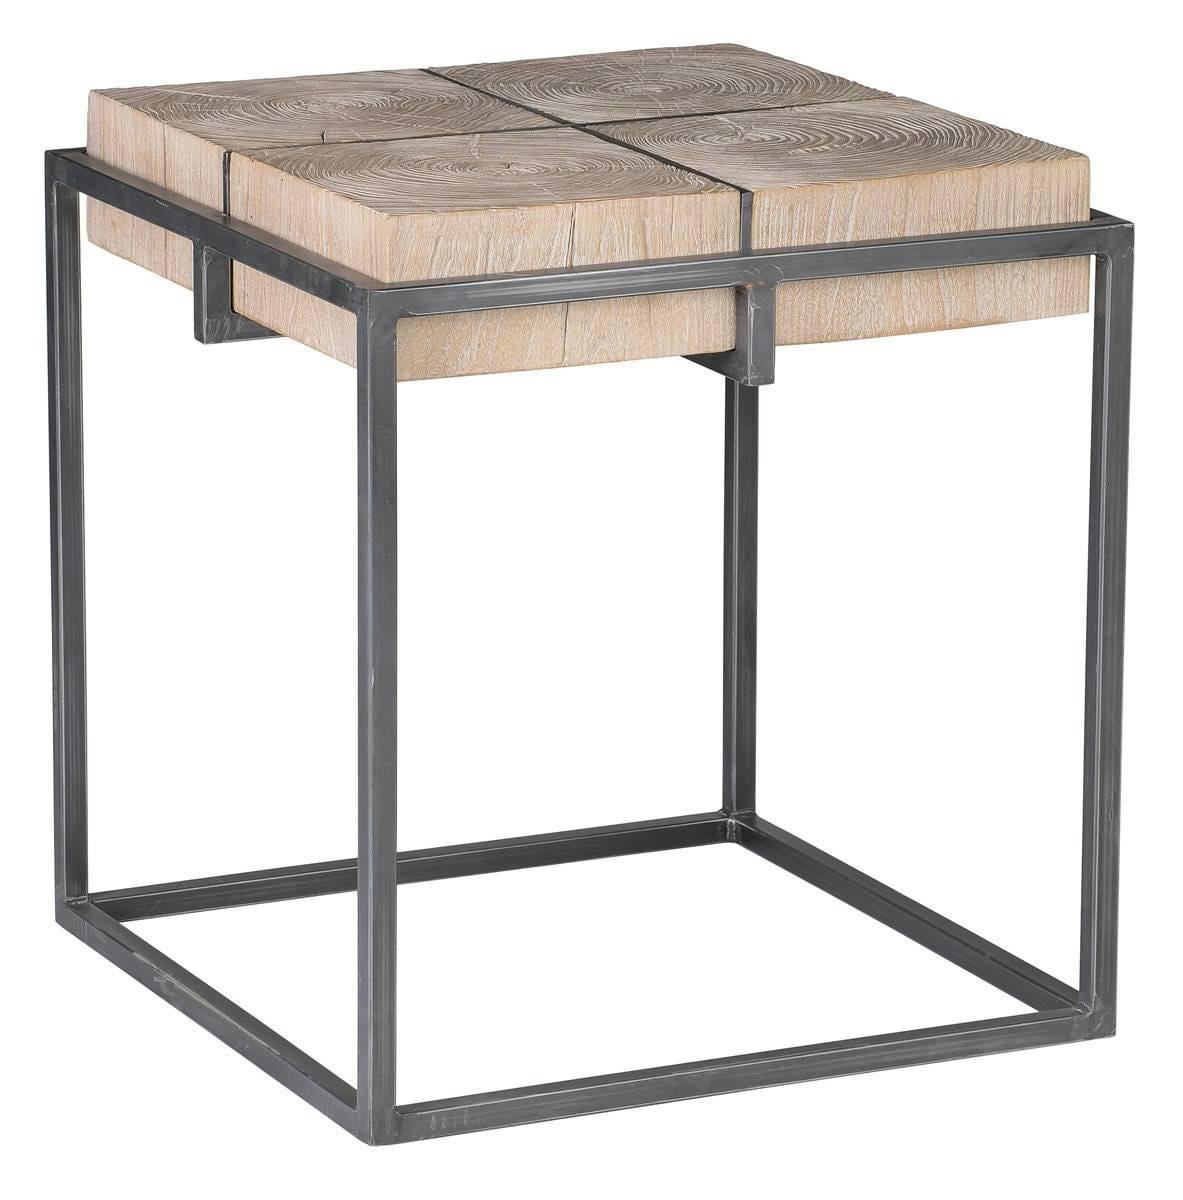 Elmwood and iron coffee table, 42 sq x 18 H.
plank construction. Side tables also available.